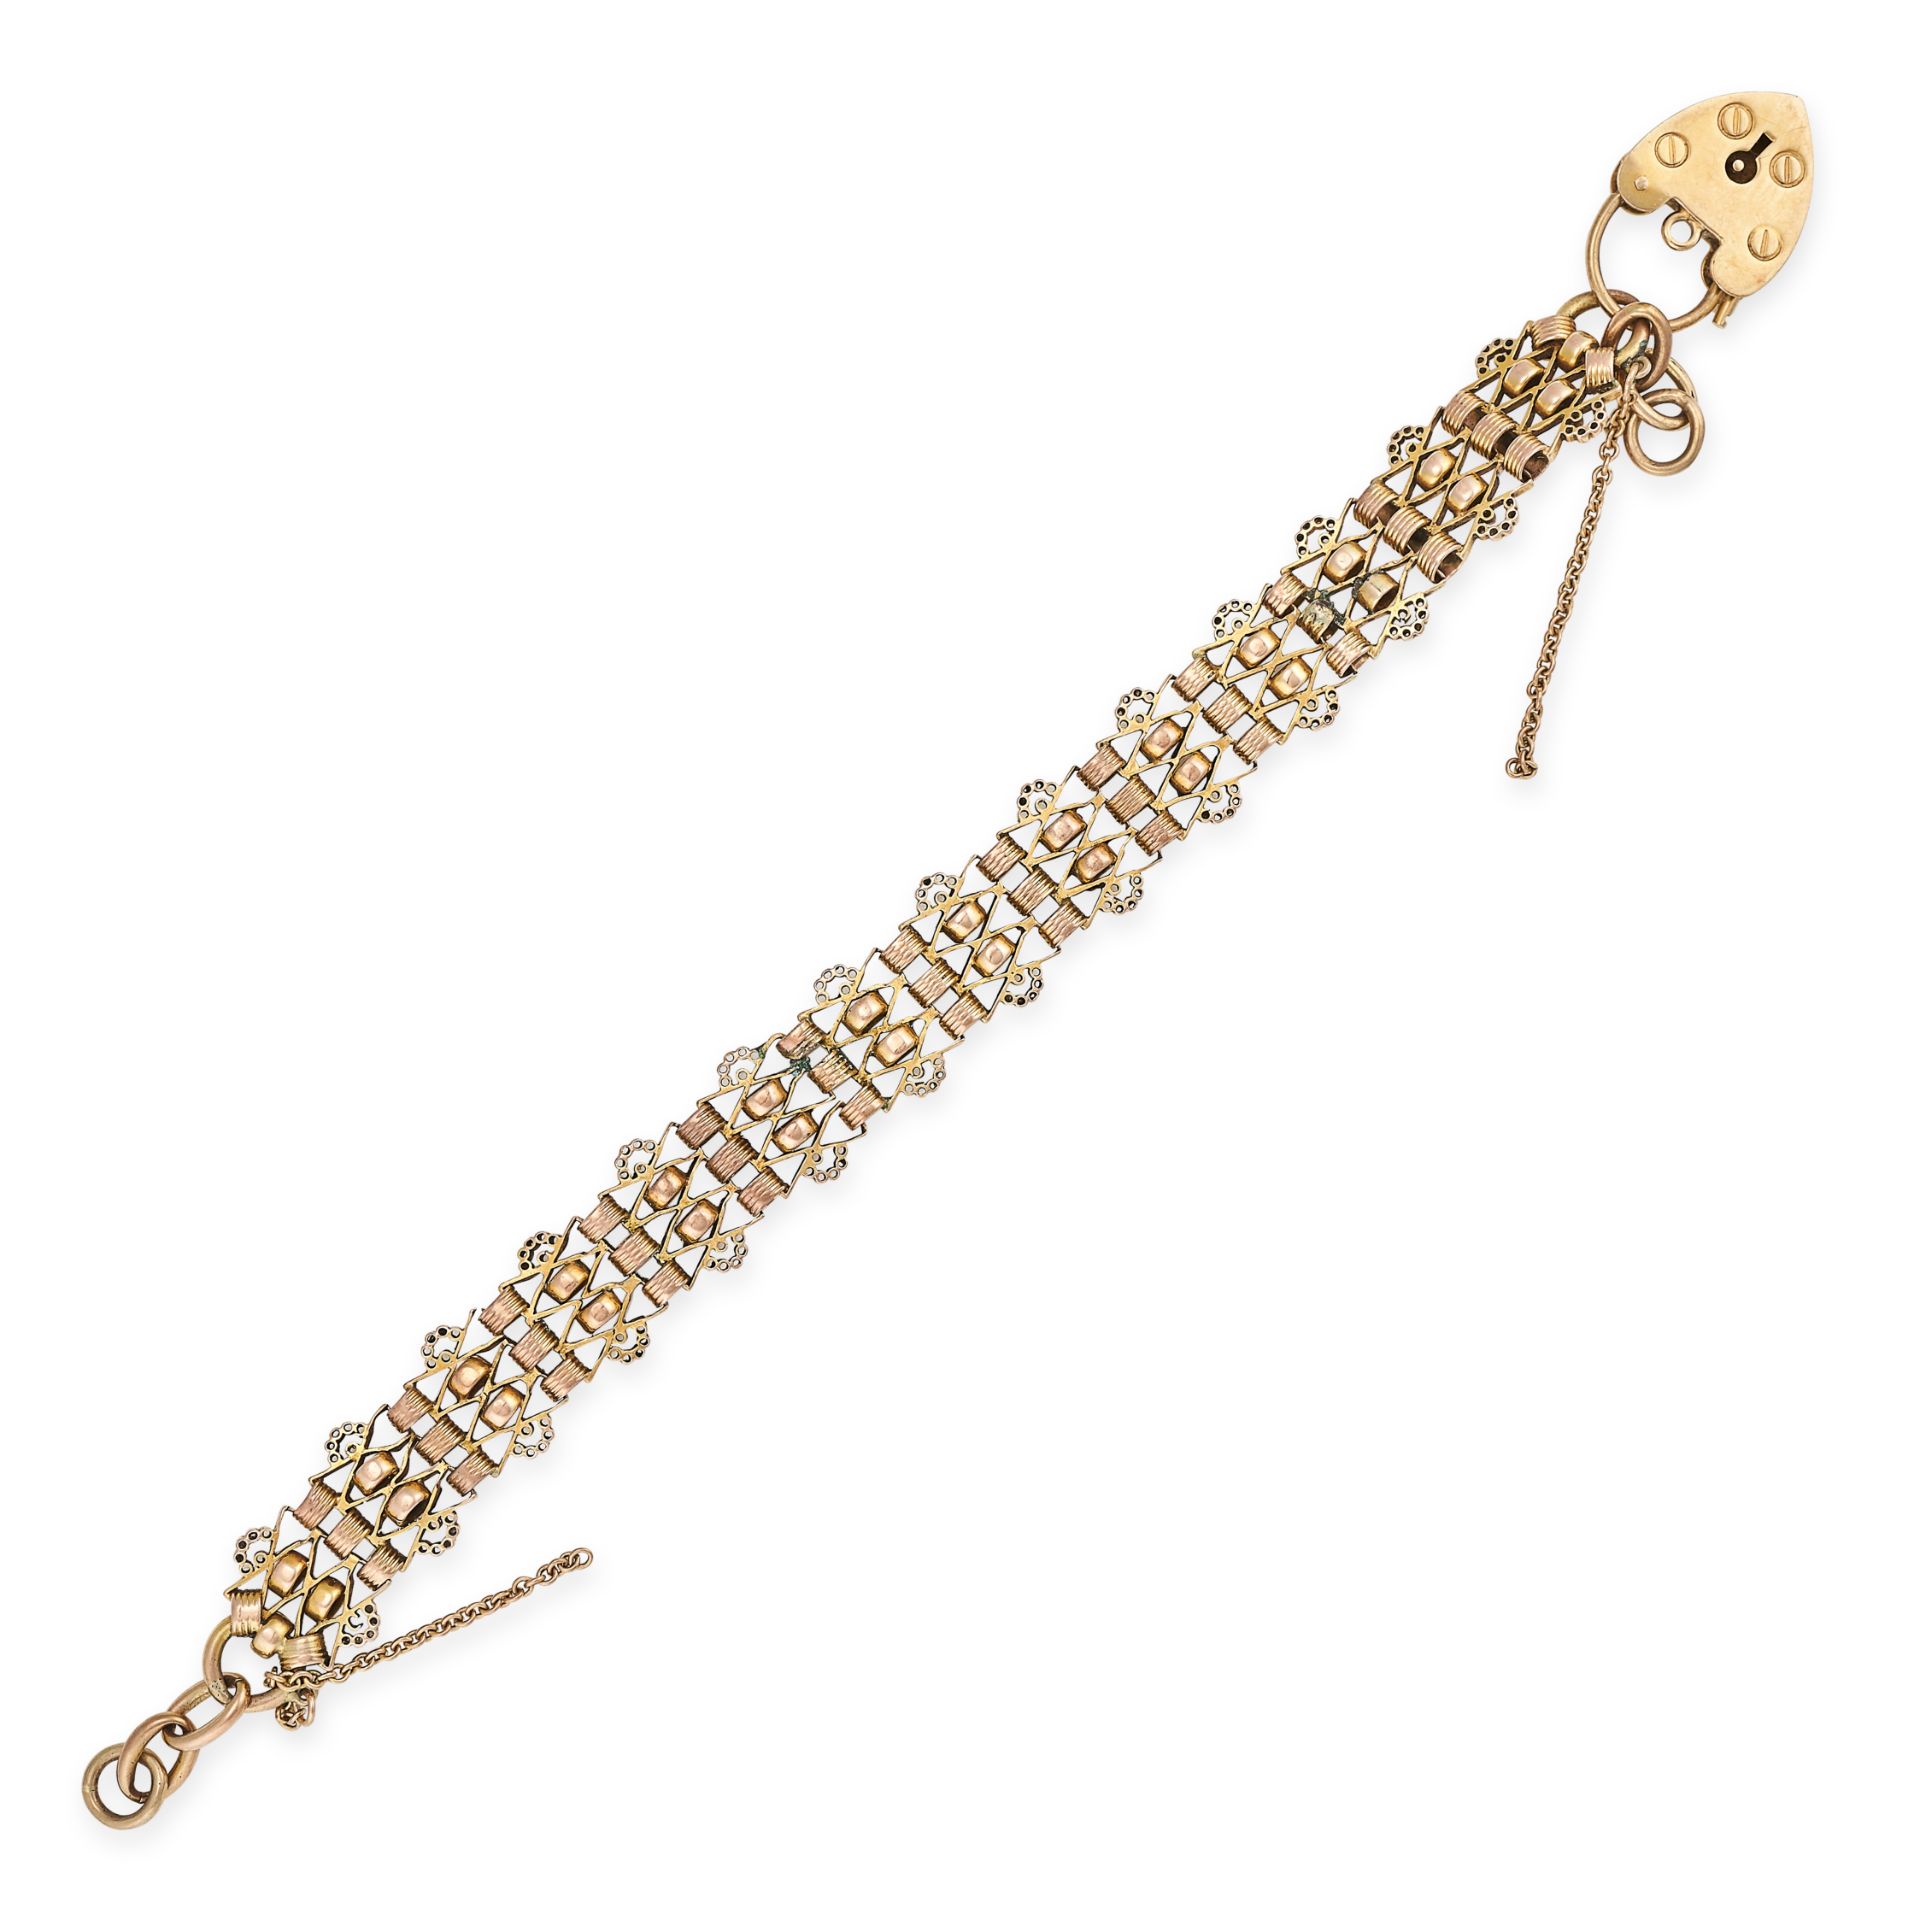 AN ANTIQUE GATE BRACELET in 9ct yellow gold, comprising a series of fancy links suspending a heart